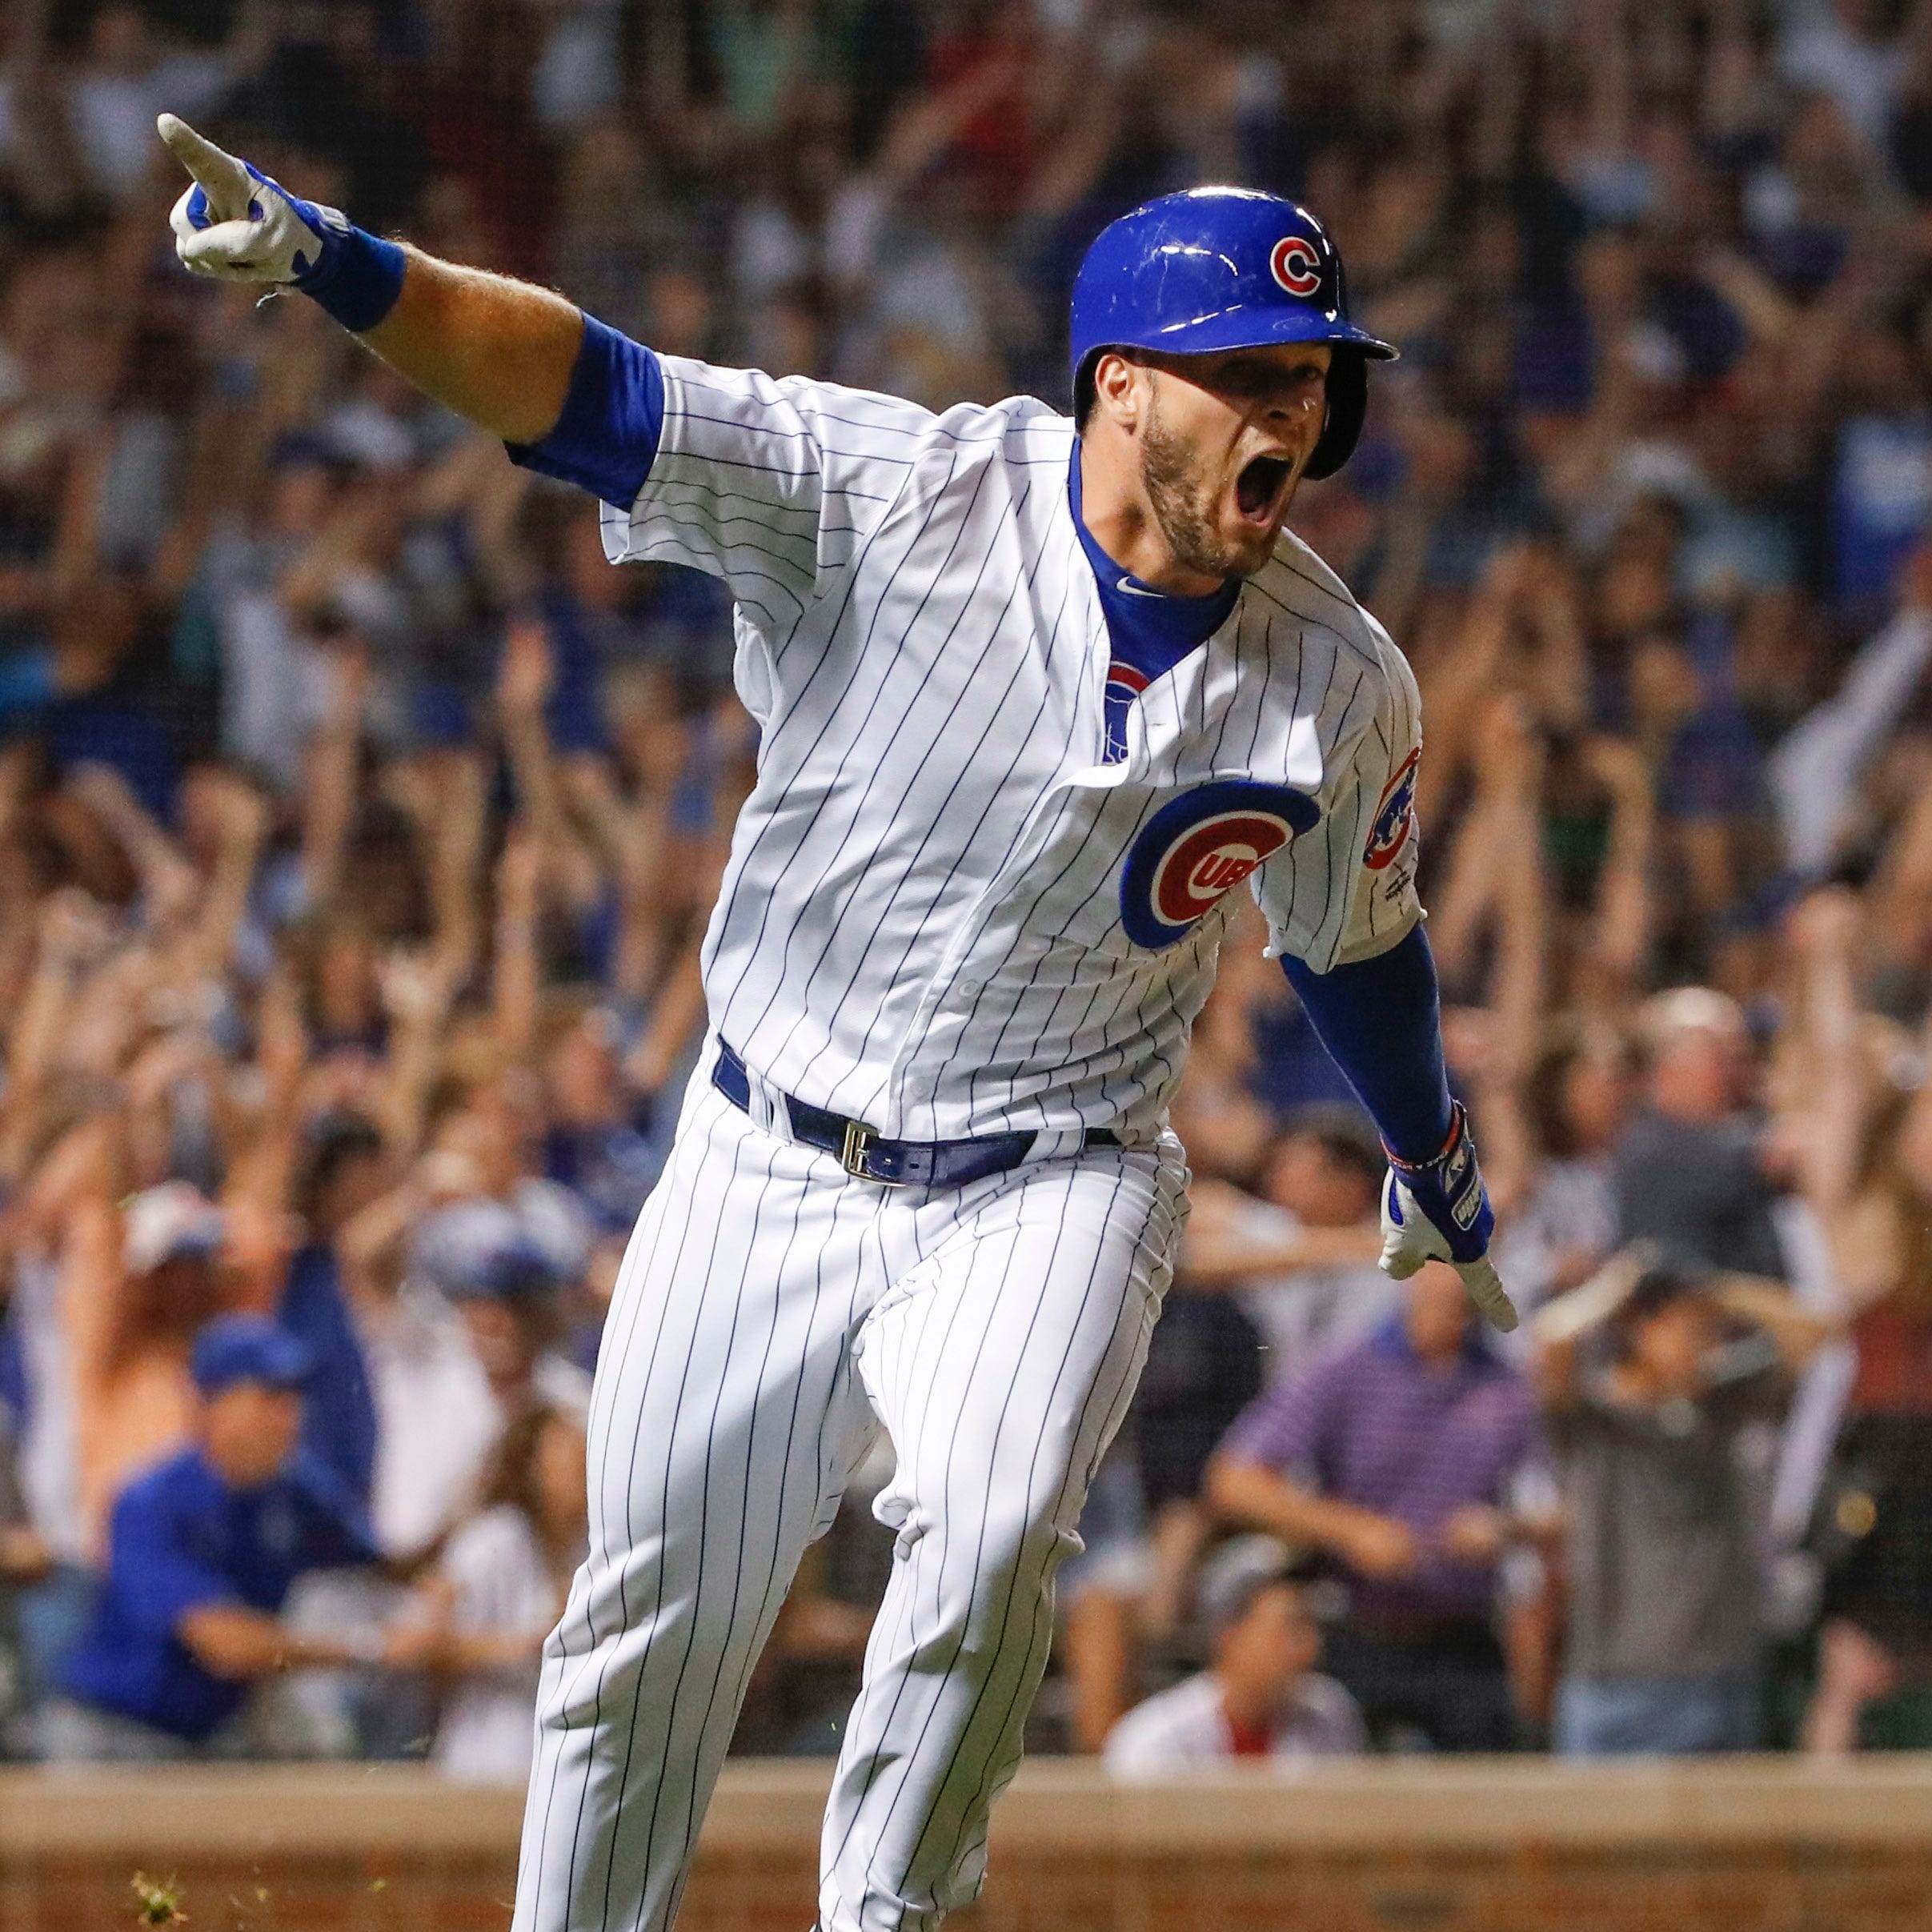 Chicago Cubs third baseman David Bote (13) reacts after hitting game winning grand slam against the Washington Nationals at Wrigley Field.